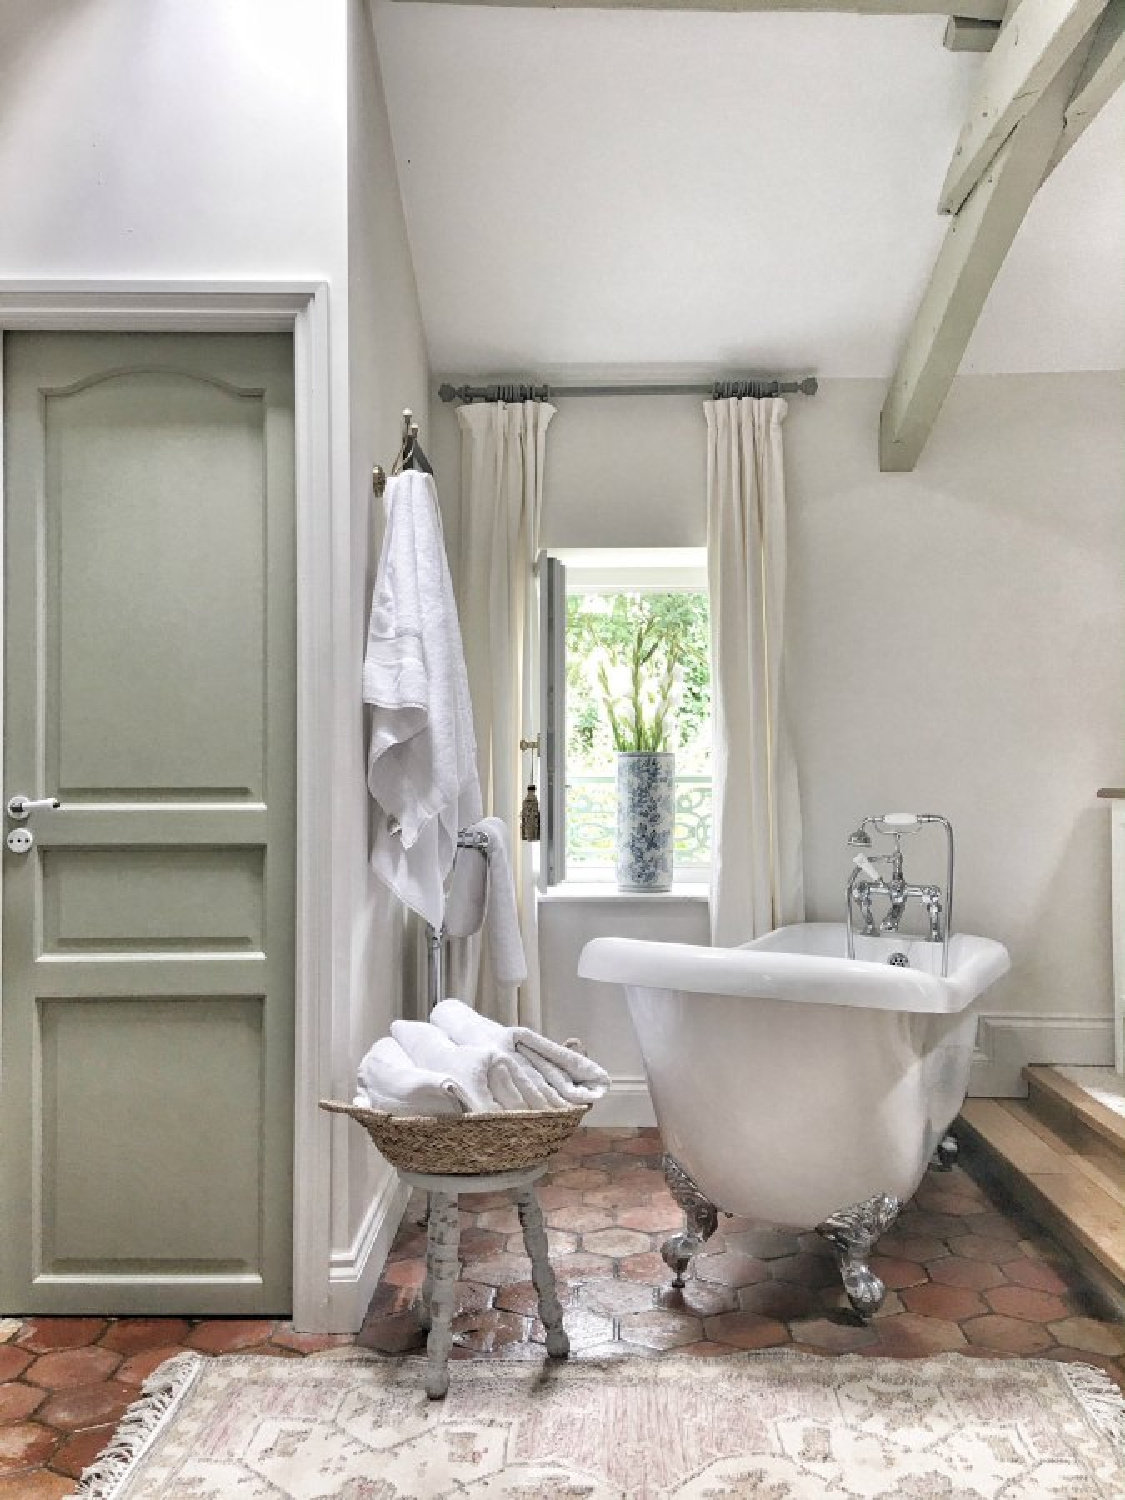 French farmhouse bathroom with Farrow and Ball French Gray painted trim, Strong White on walls, clawfoot tub, beamed ceiling, and antique terracotta floor tiles. Vivi et Margot. #vivietmargot #frenchfarmhouse #bathroomdesign #clawfoottub #farrowandballfrenchgray